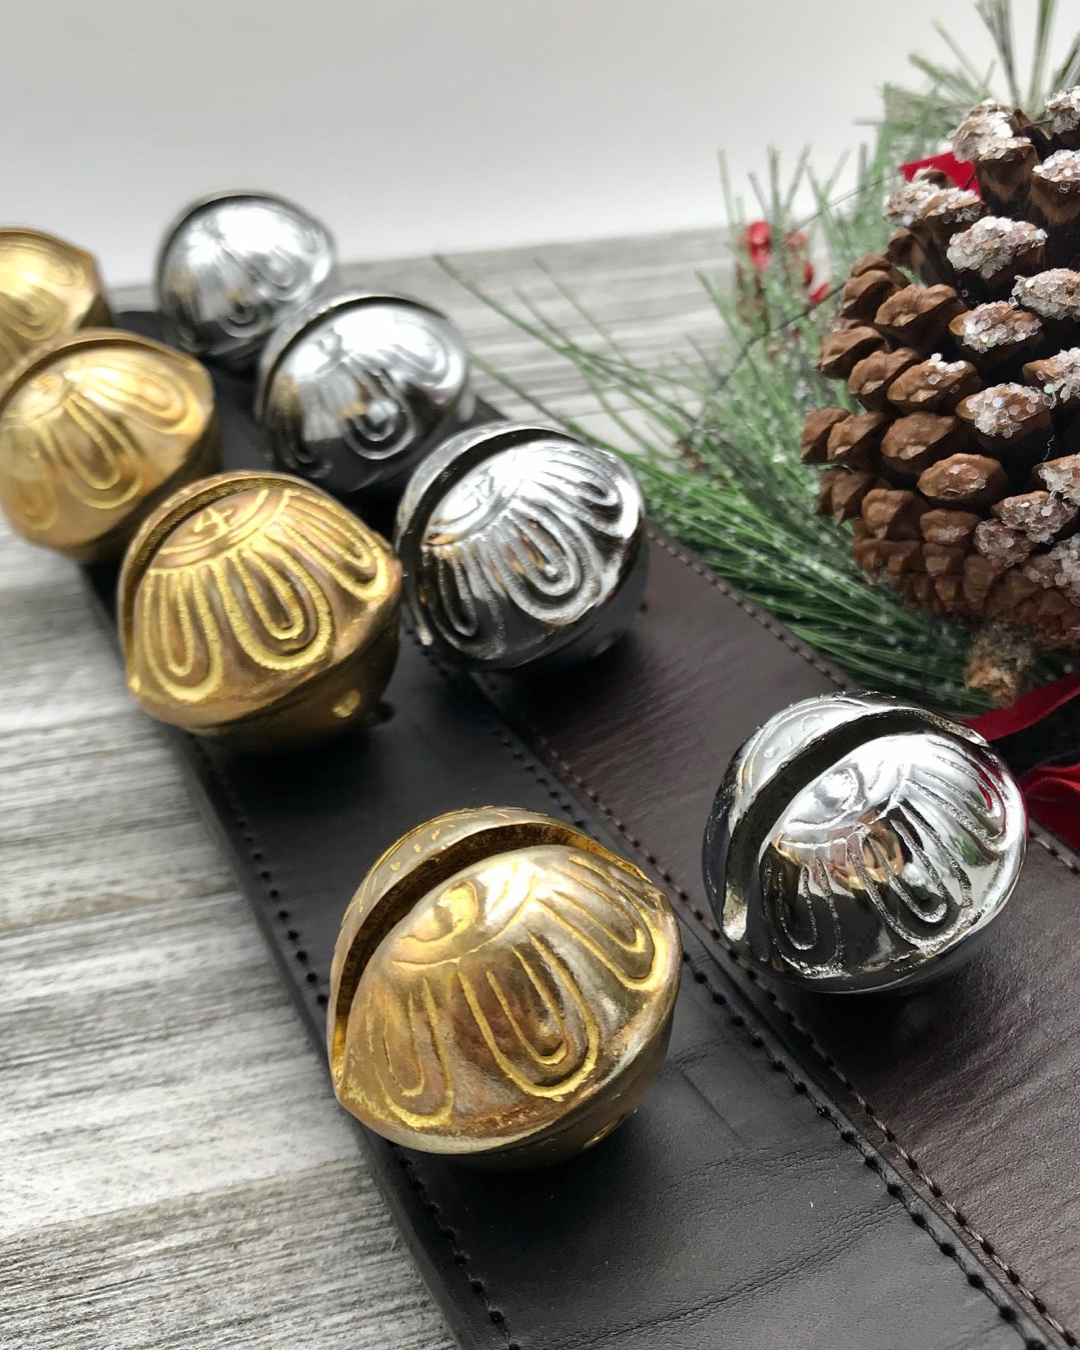 12 Authentic Graduating Solid Brass Sleigh Bells, Leather Sleigh Bells Set, Handmade In USA.